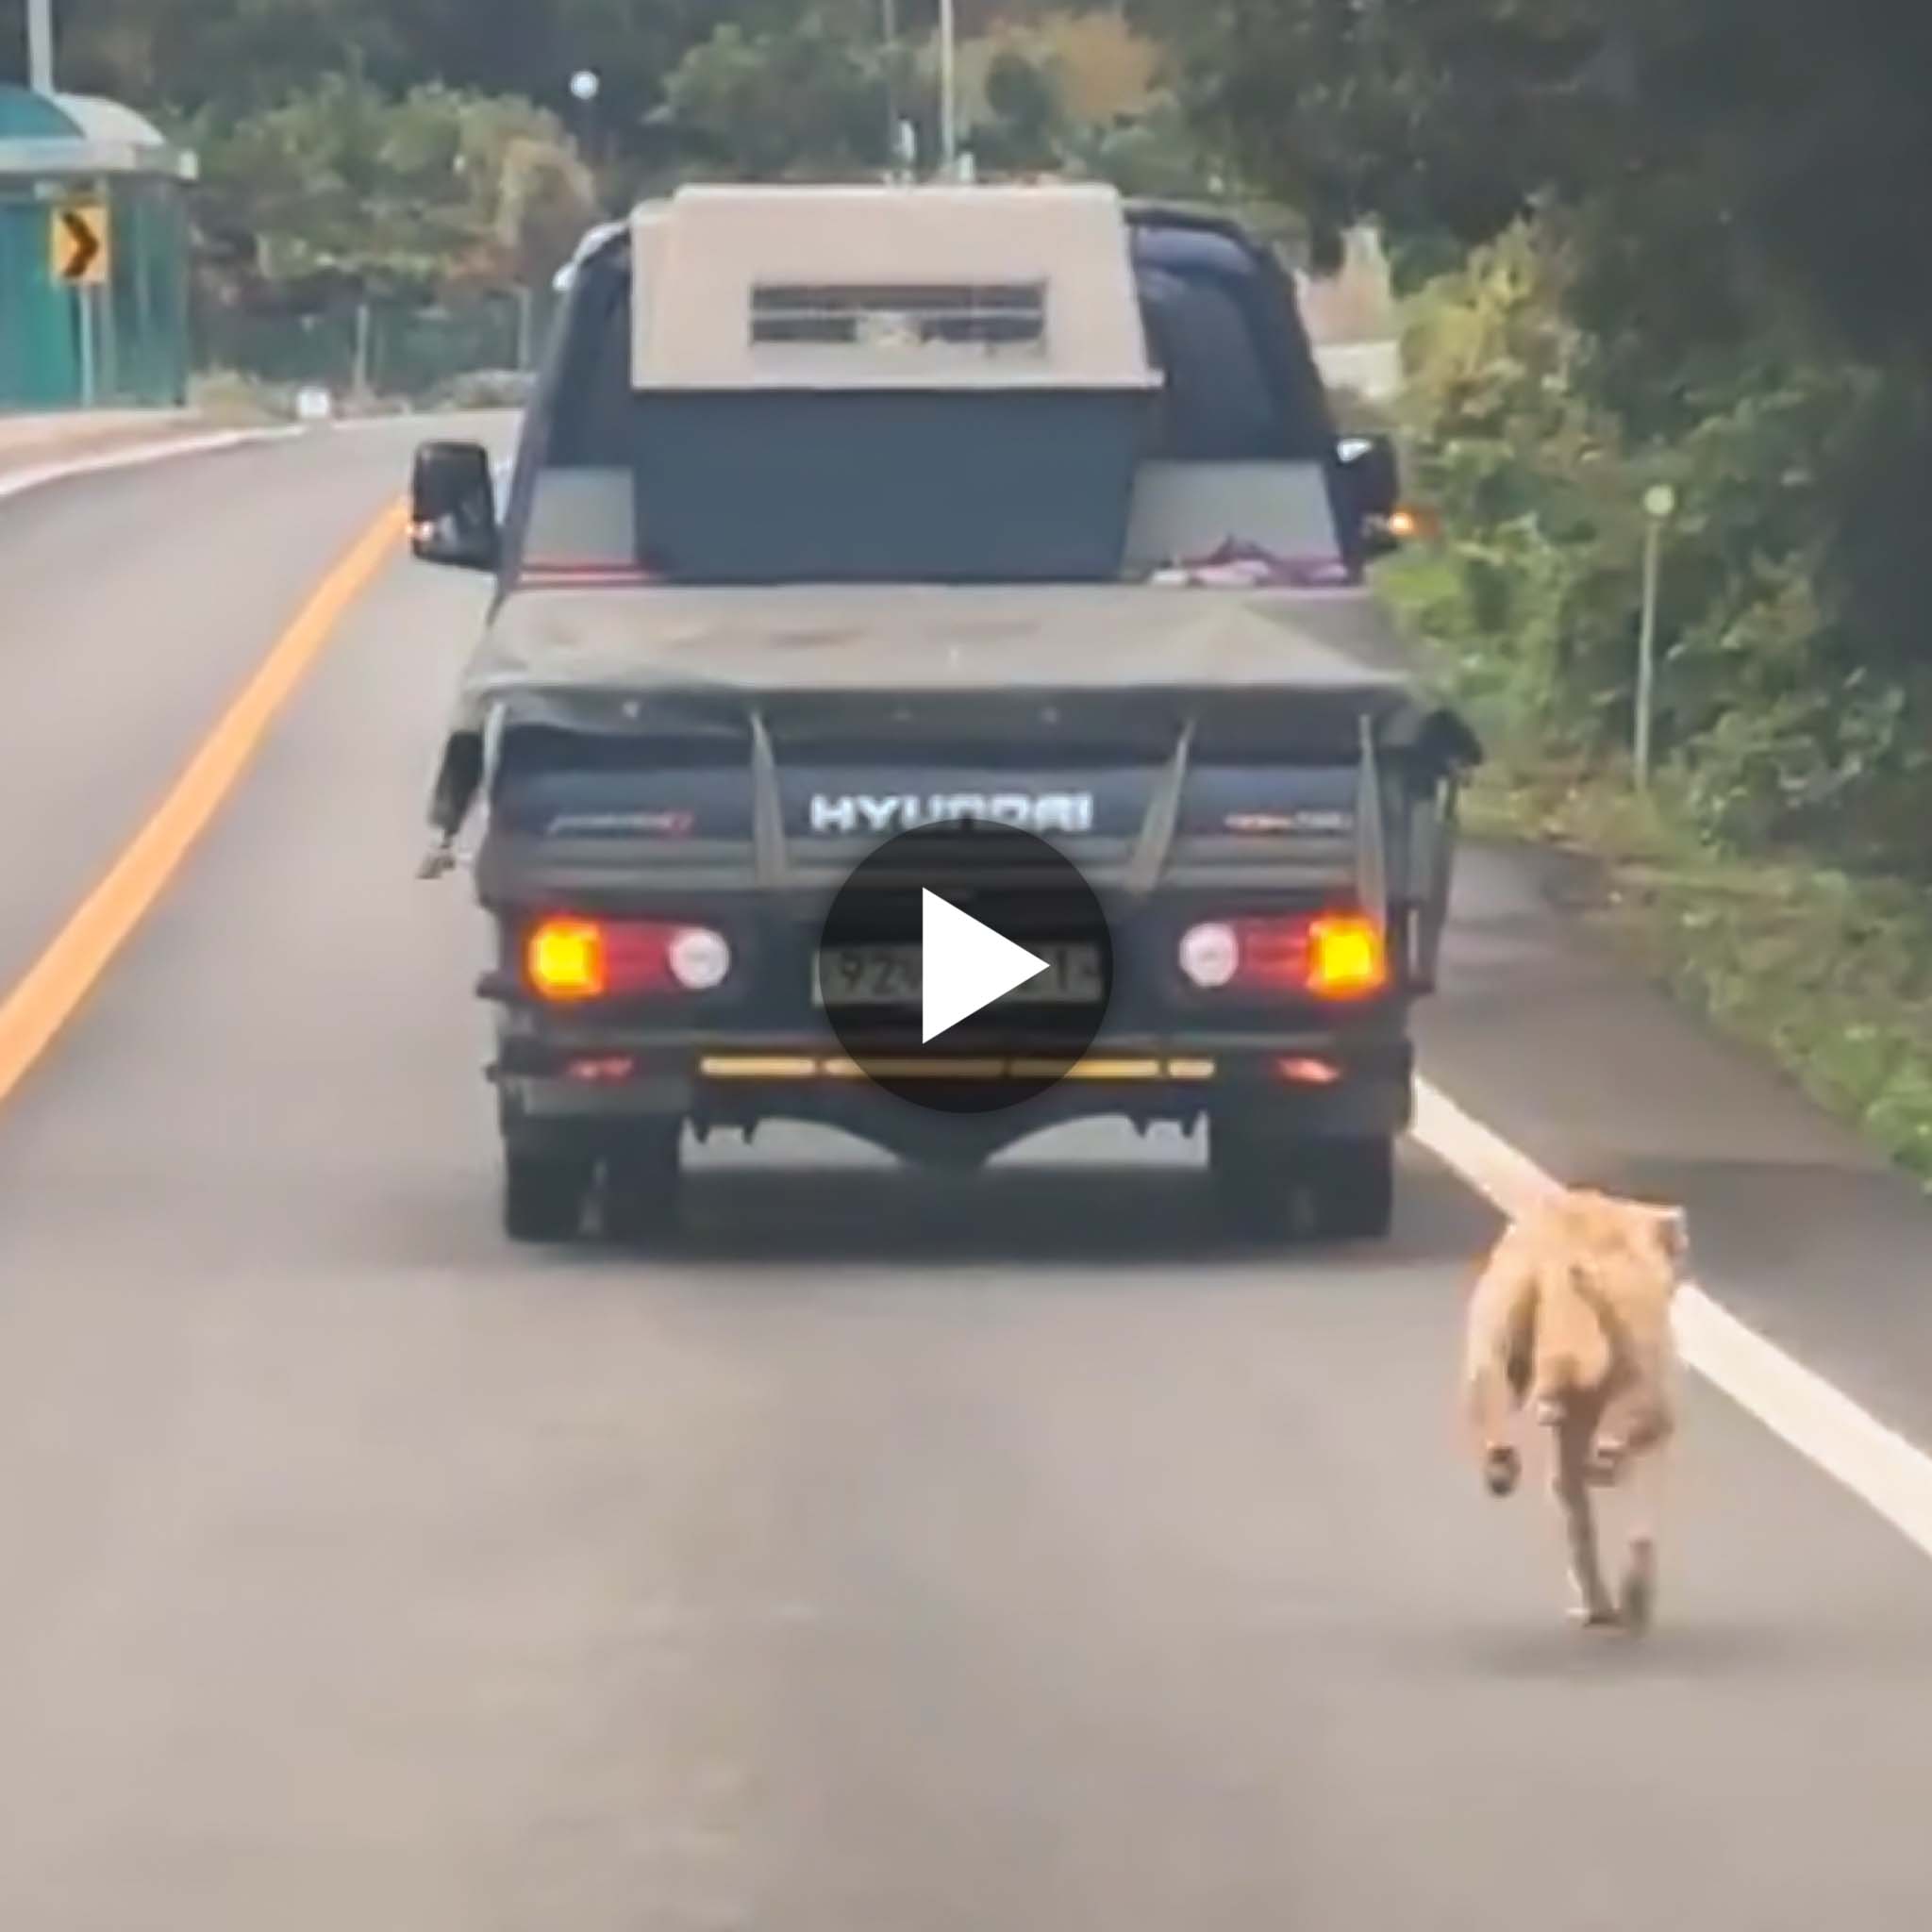 I nervously watched the dog try to run to the back of the truck to reclaim his stolen children, despite the danger.